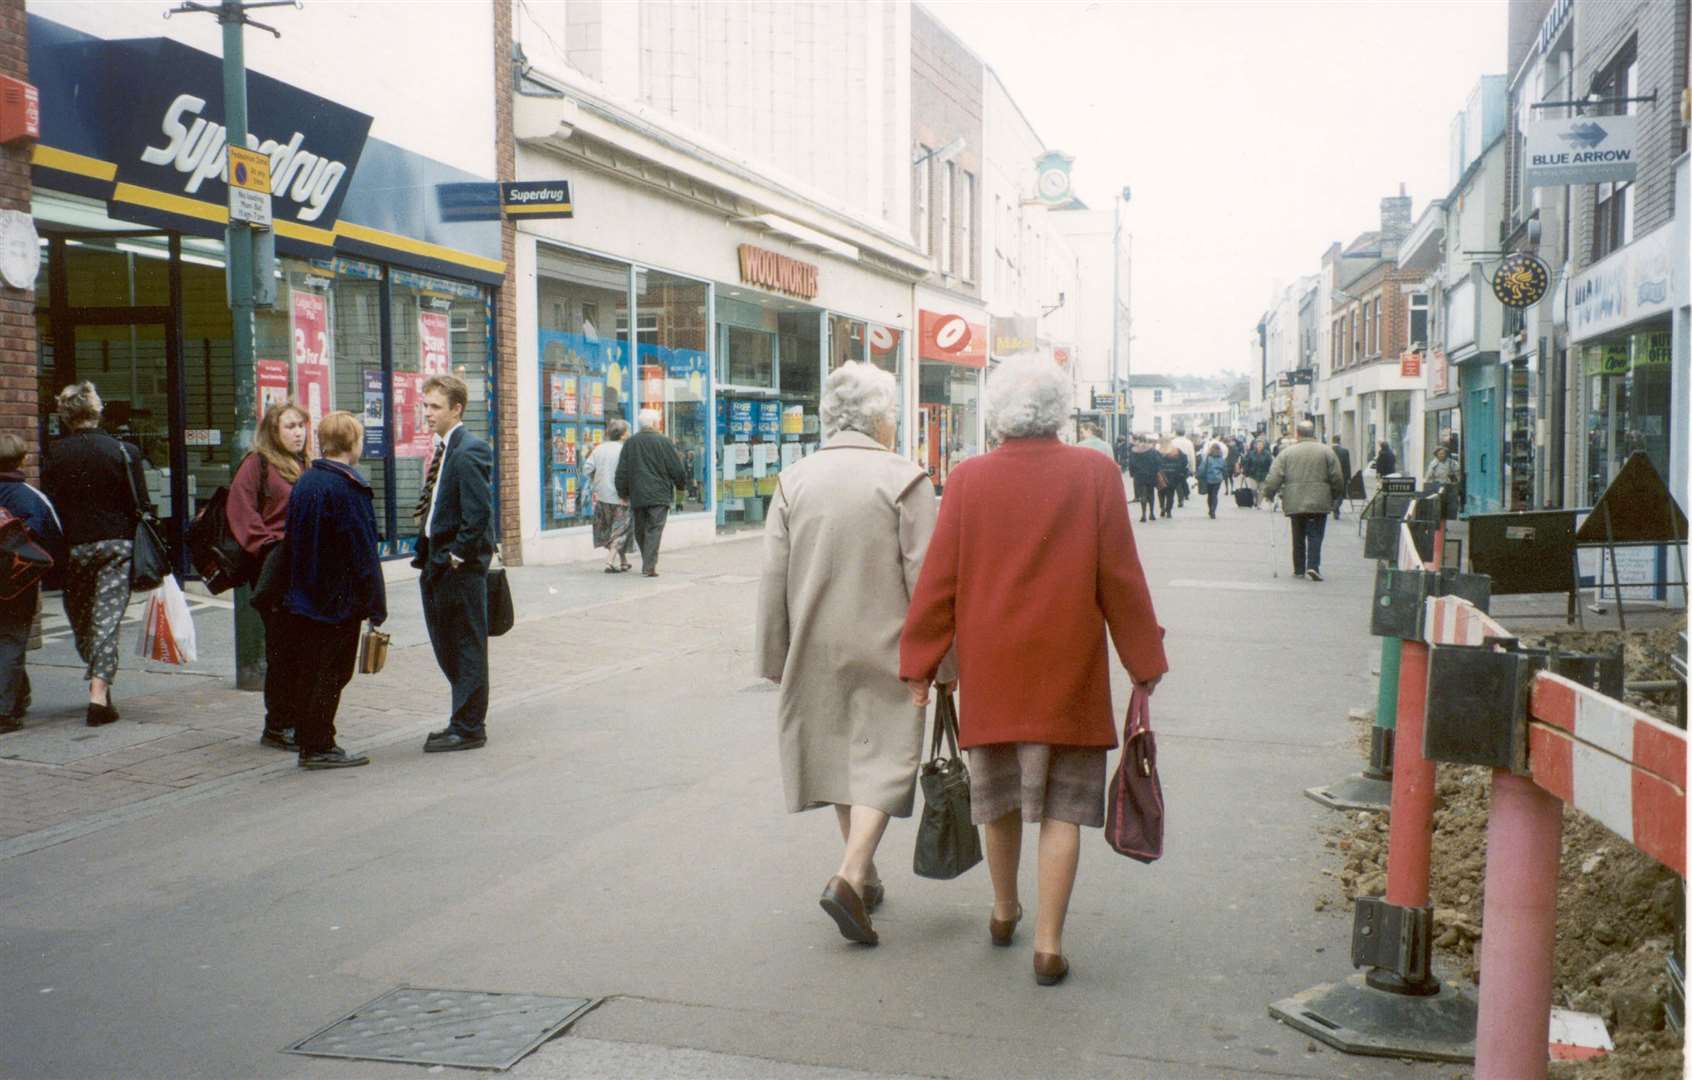 Shoppers stroll past Superdrug and Woolworths in Week Street, Maidstone, in 1996. Woolworths is now occupied by a Poundland and a Deichmann store